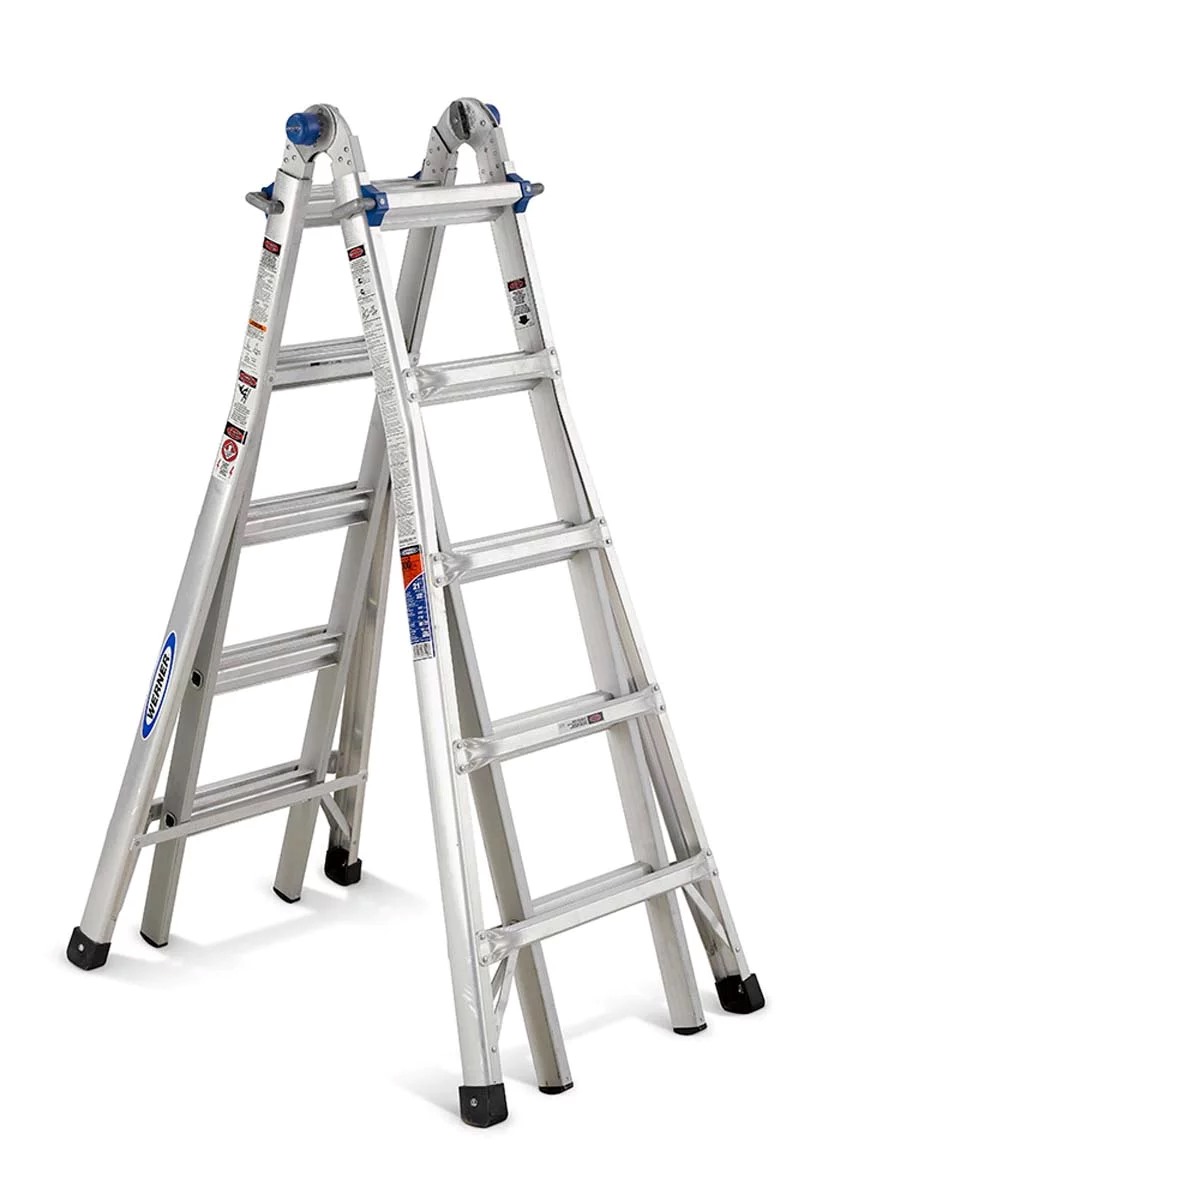 What Is An Articulated Ladder